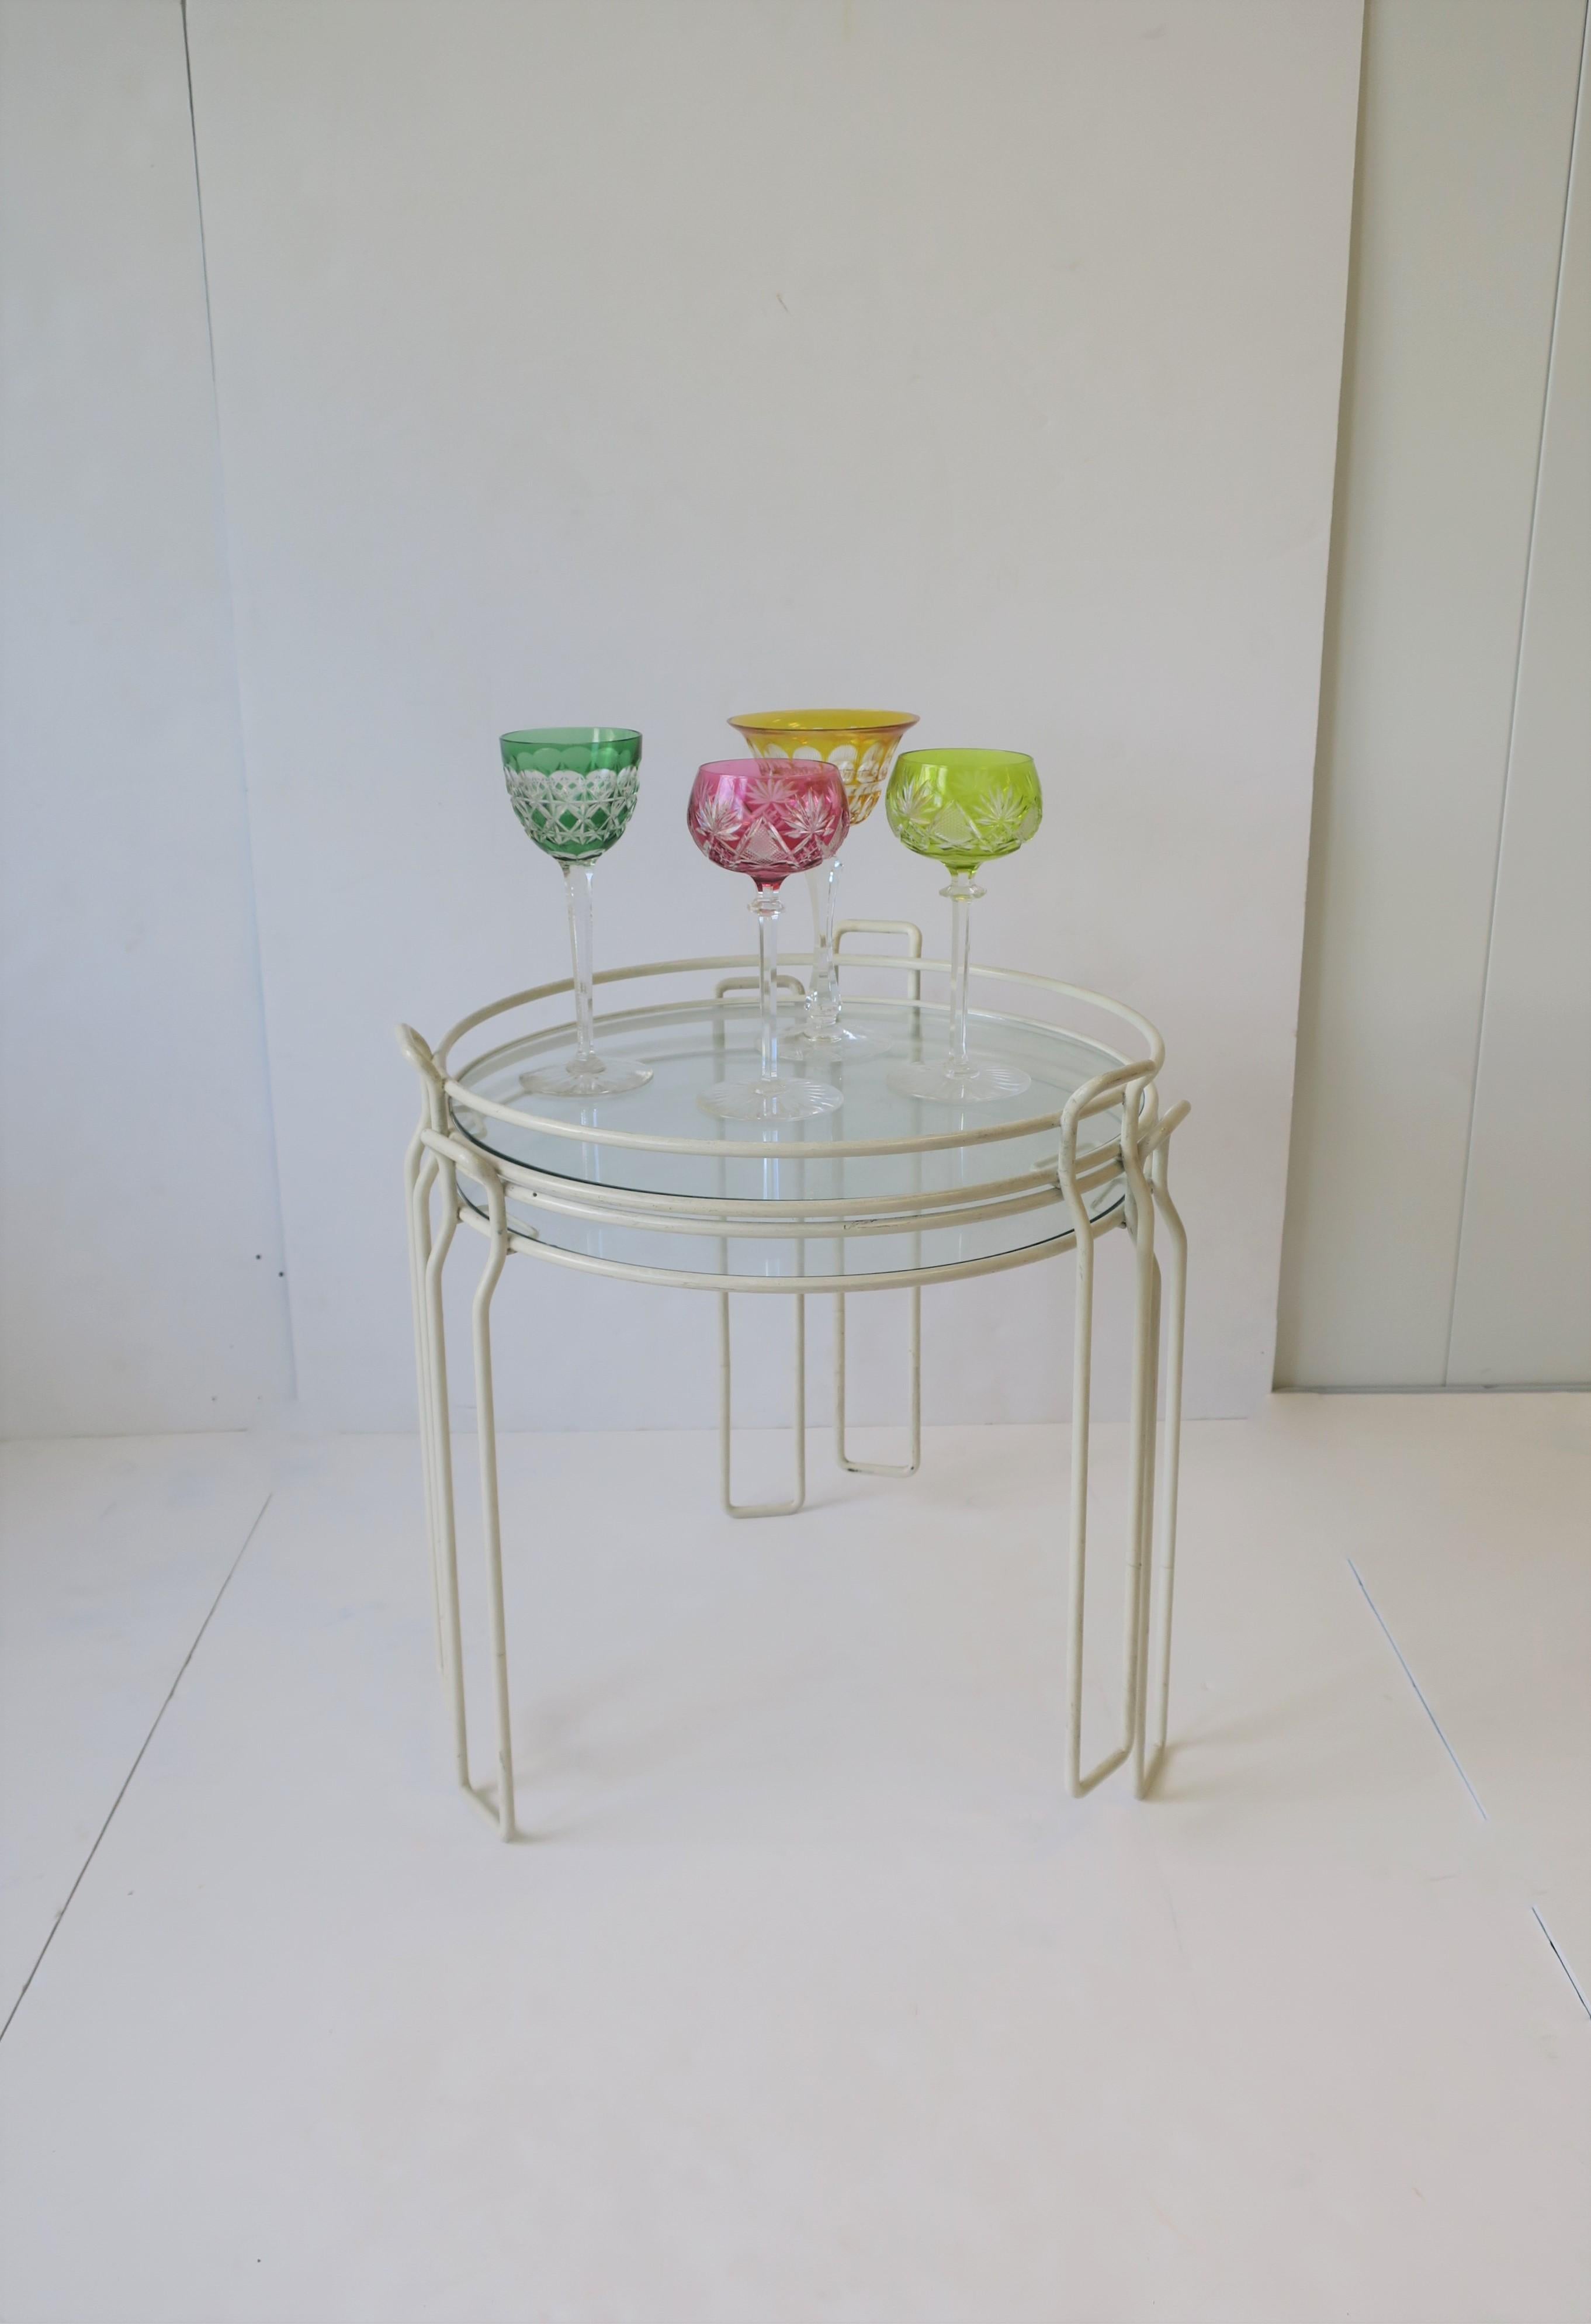 Midcentury Modern White Side Drinks Nesting or Stacking Tables, Pair, 1960s For Sale 2